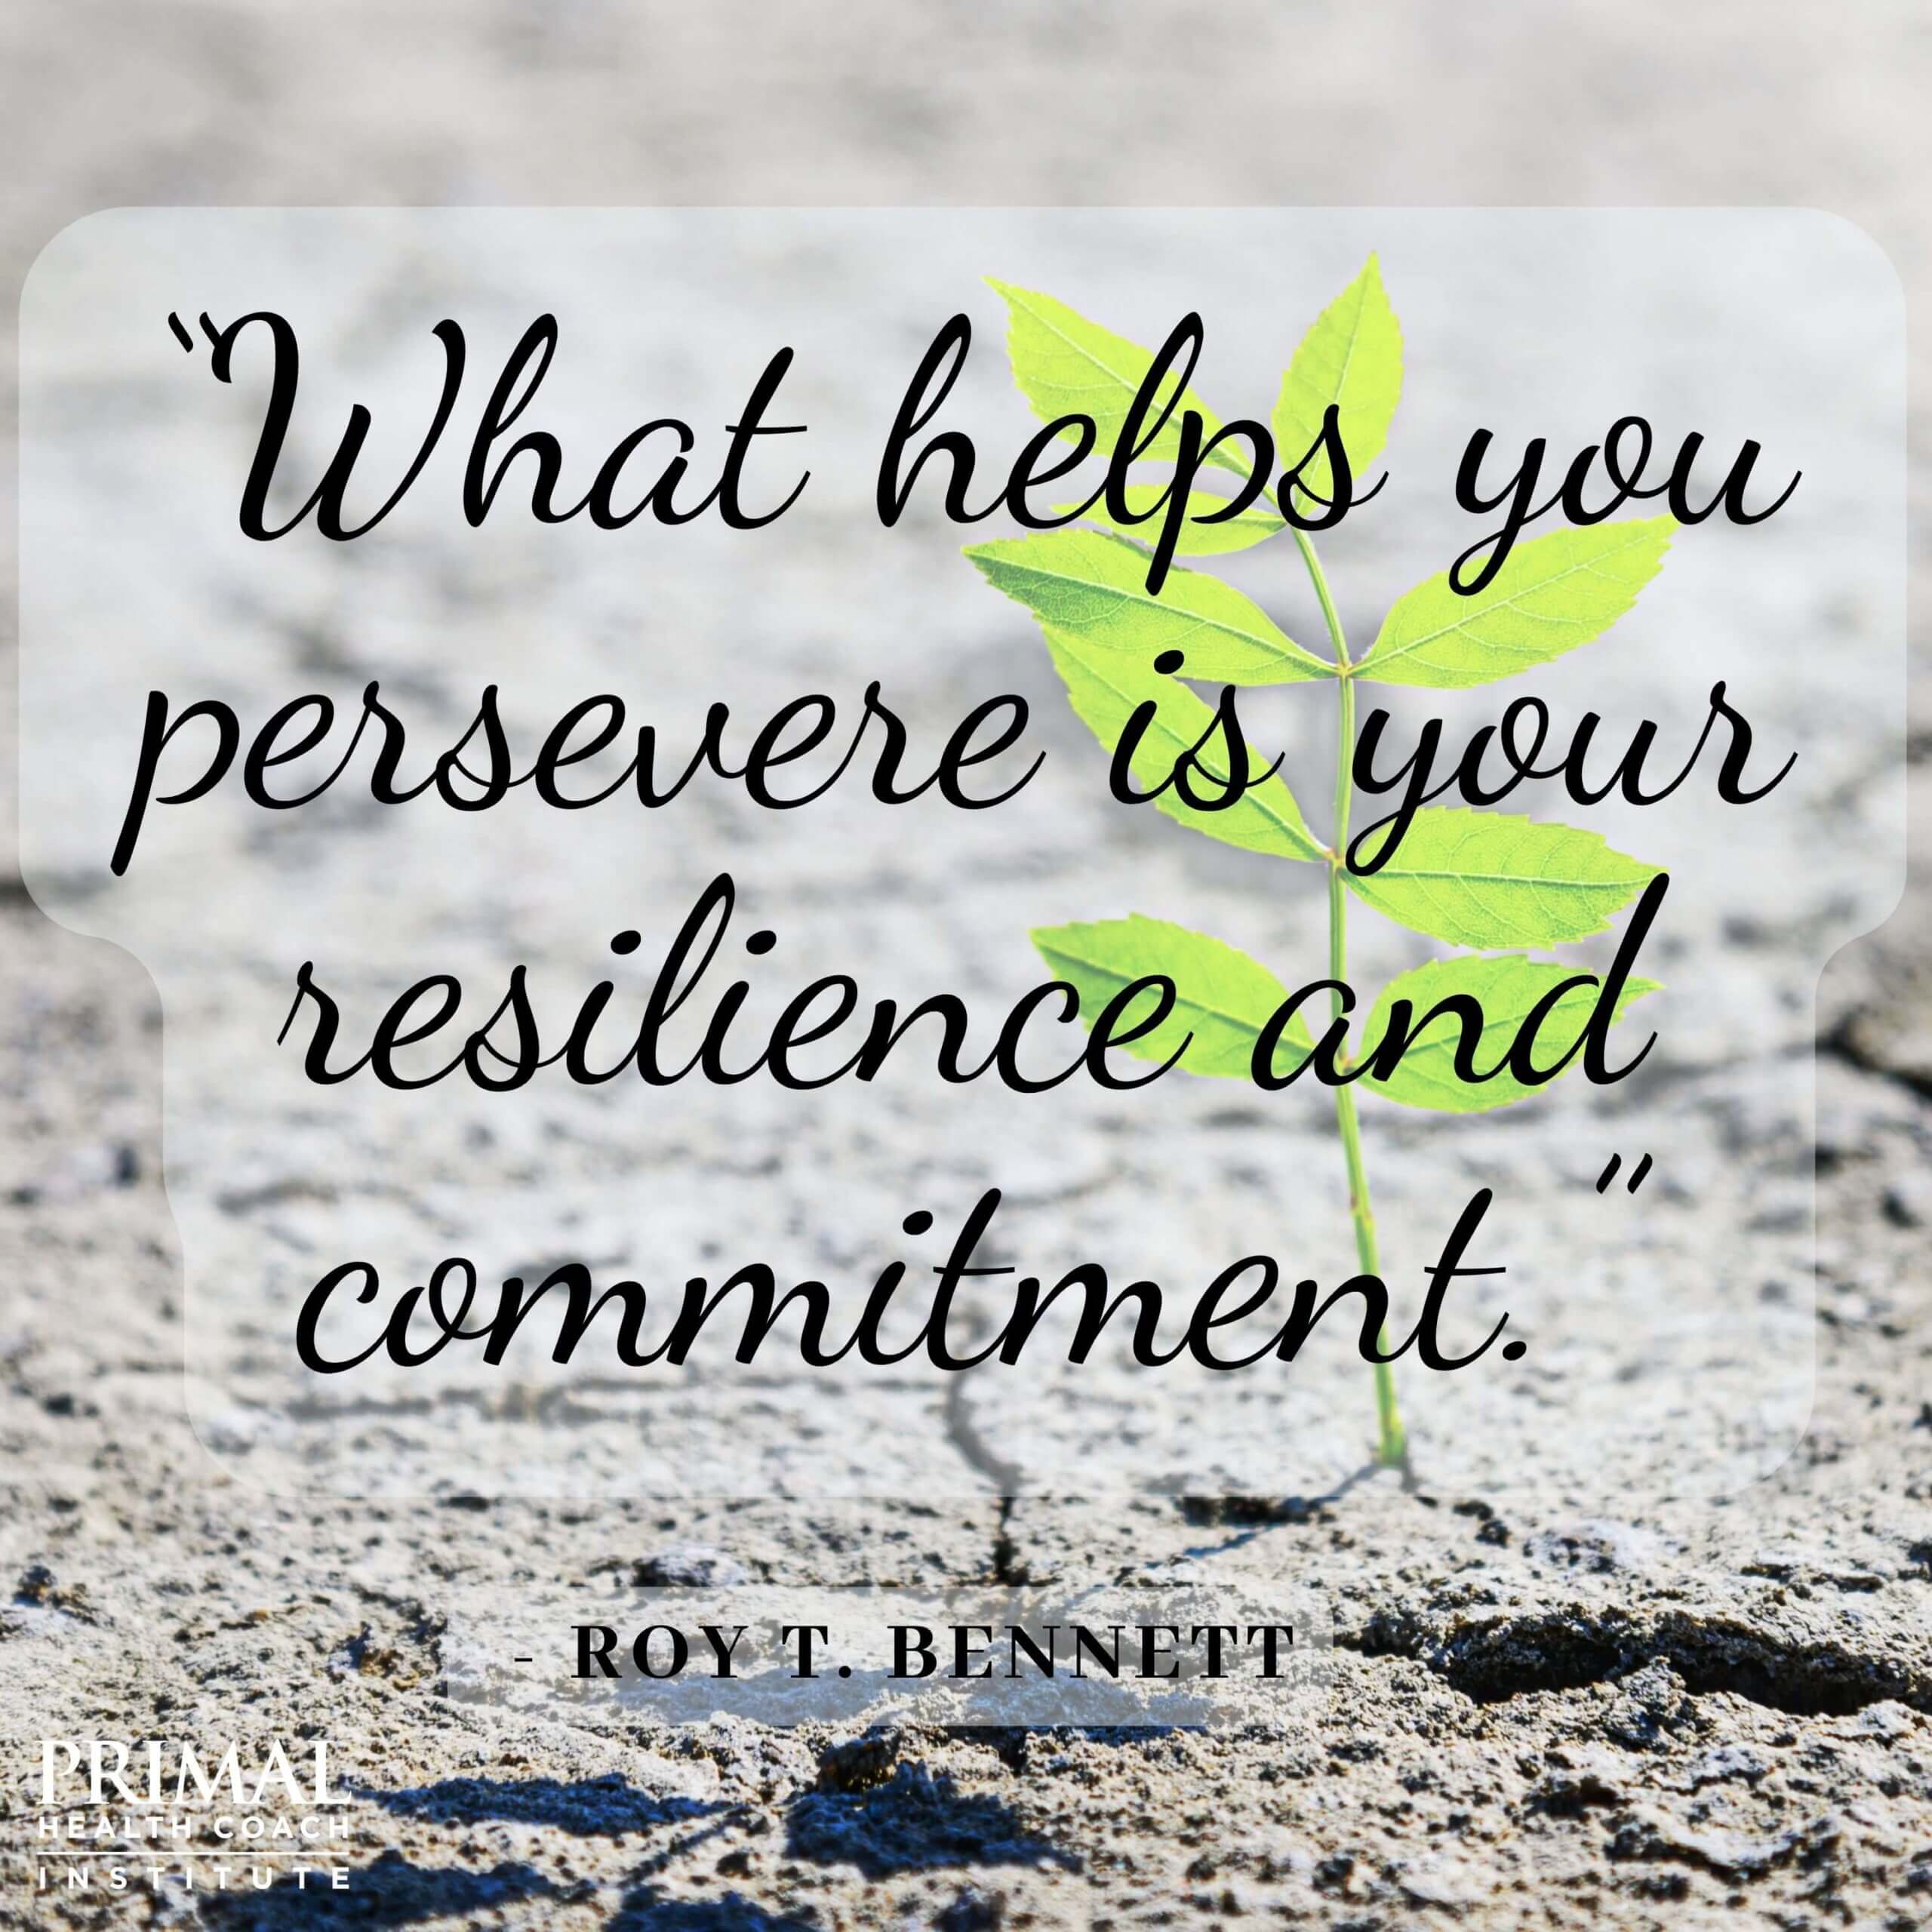 “What helps you persevere is your resilience and commitment.”  